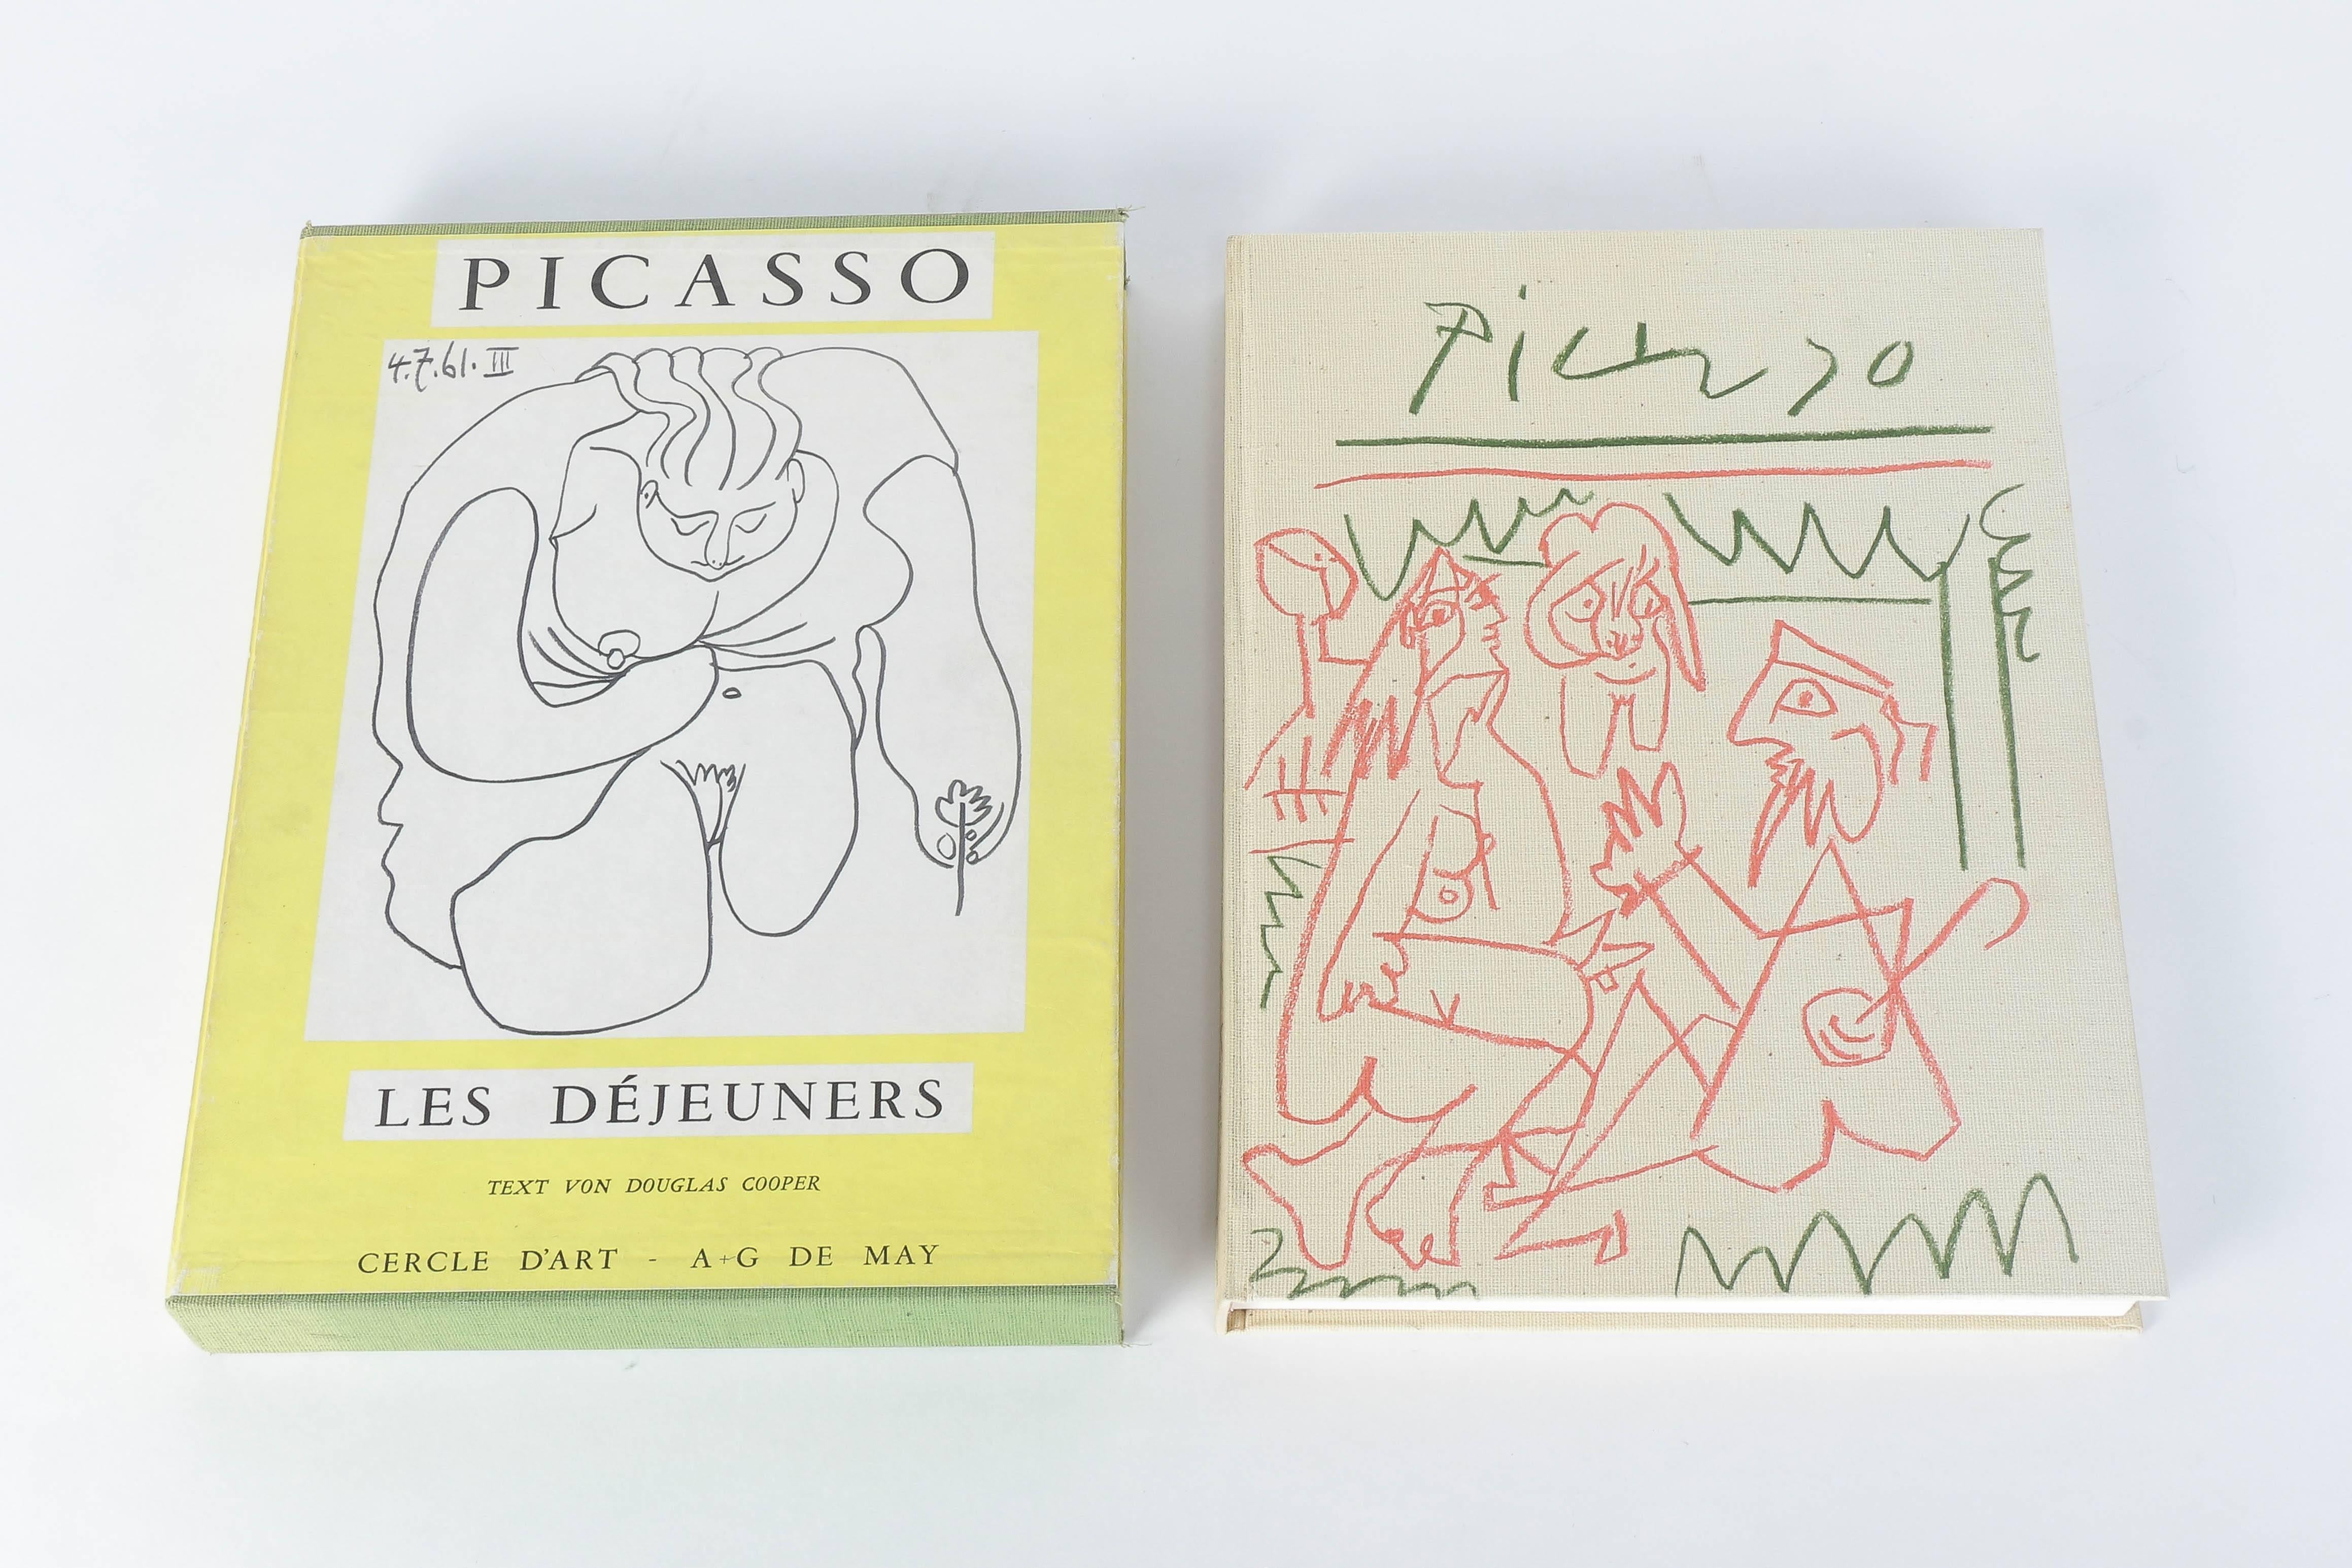 Very rare book Picasso, Les Déjeuners text by Douglas Cooper in German, Edition Cercle D'Art - A+G De May from 1962. Hard cover edition of a limited edition. Cloth bound book in original paper cloth slipcase. Many illustrations by Picasso in color